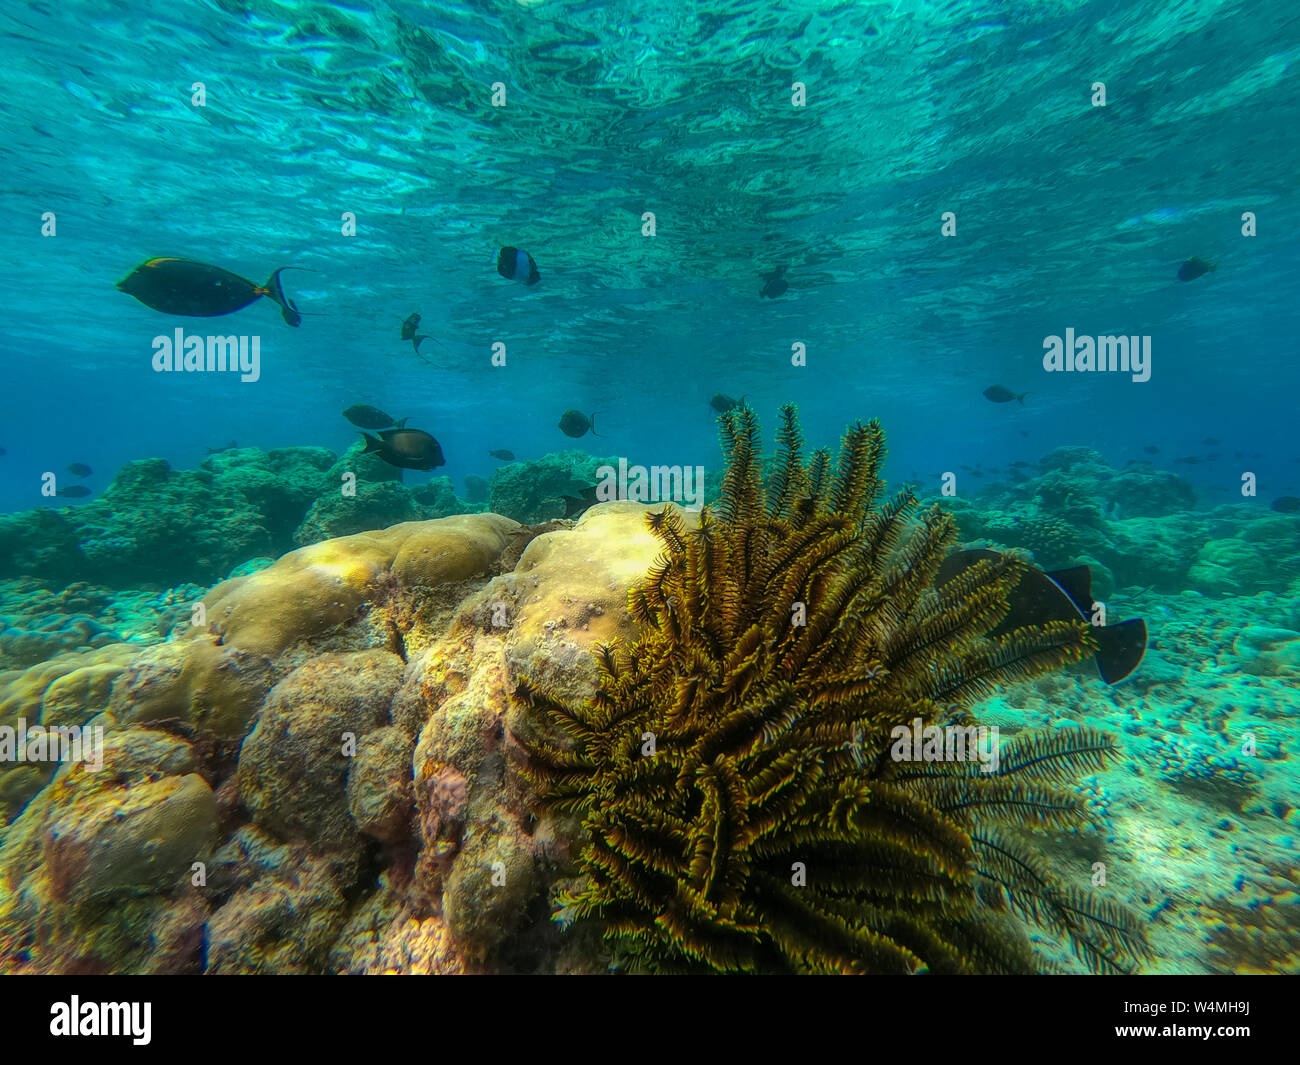 In this unique photo you can see the underwater world of the Pacific Ocean in the Maldives! Lots of coral and tropical fish! Stock Photo